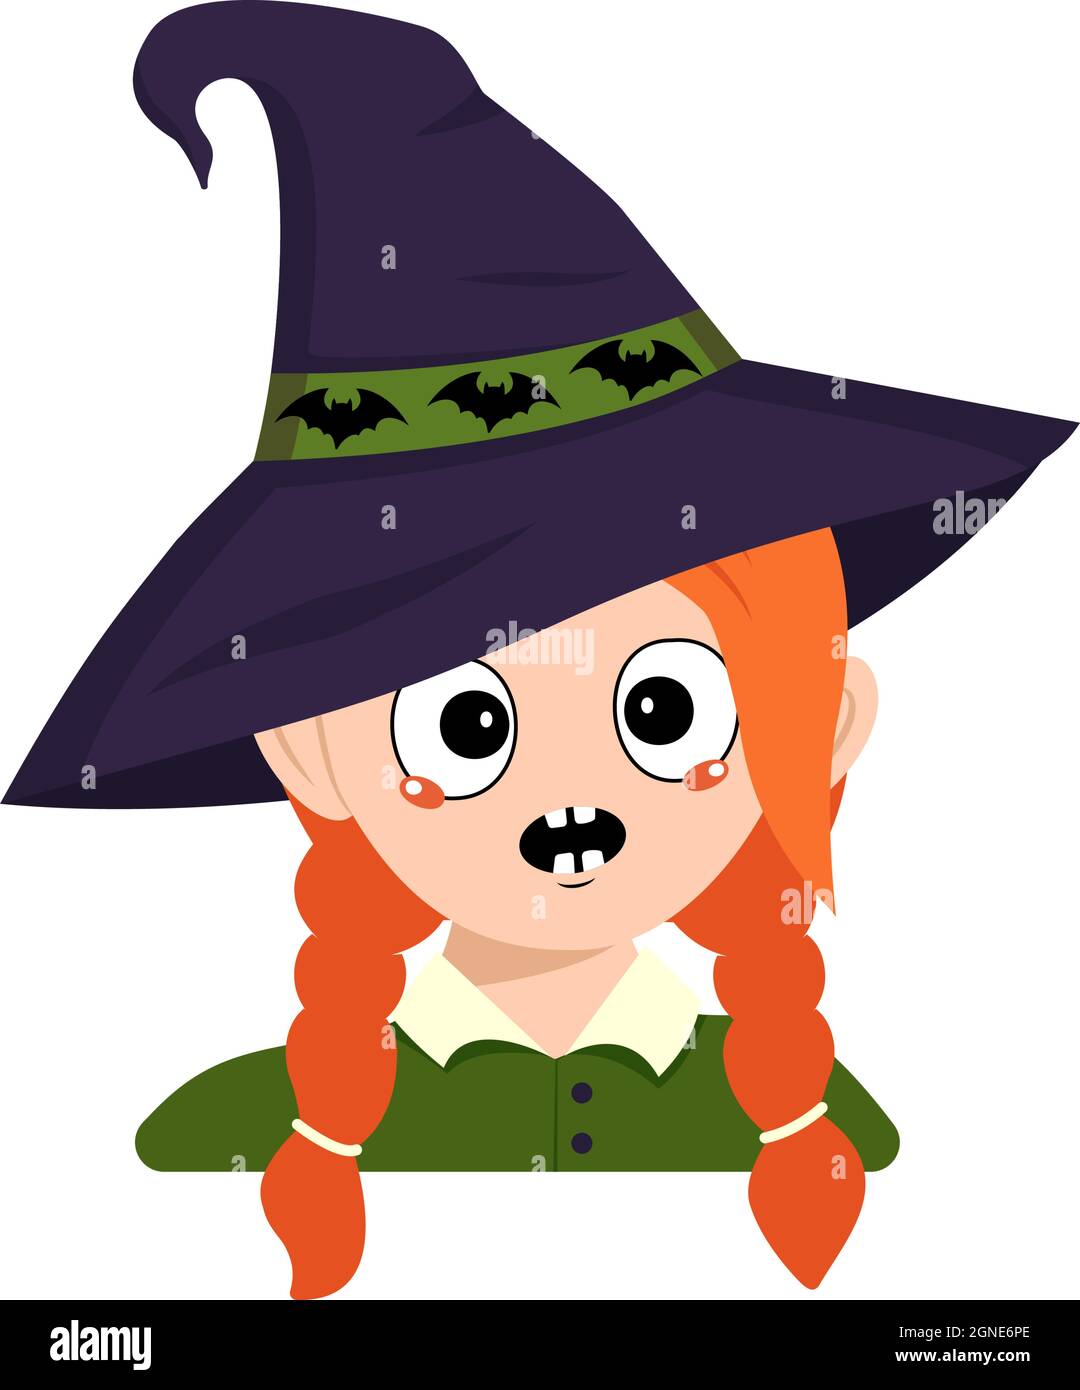 Girl with emotions panic, surprised face, shocked eyes in a pointed witch hat with bats. The head of child. Halloween party decoration Stock Vector